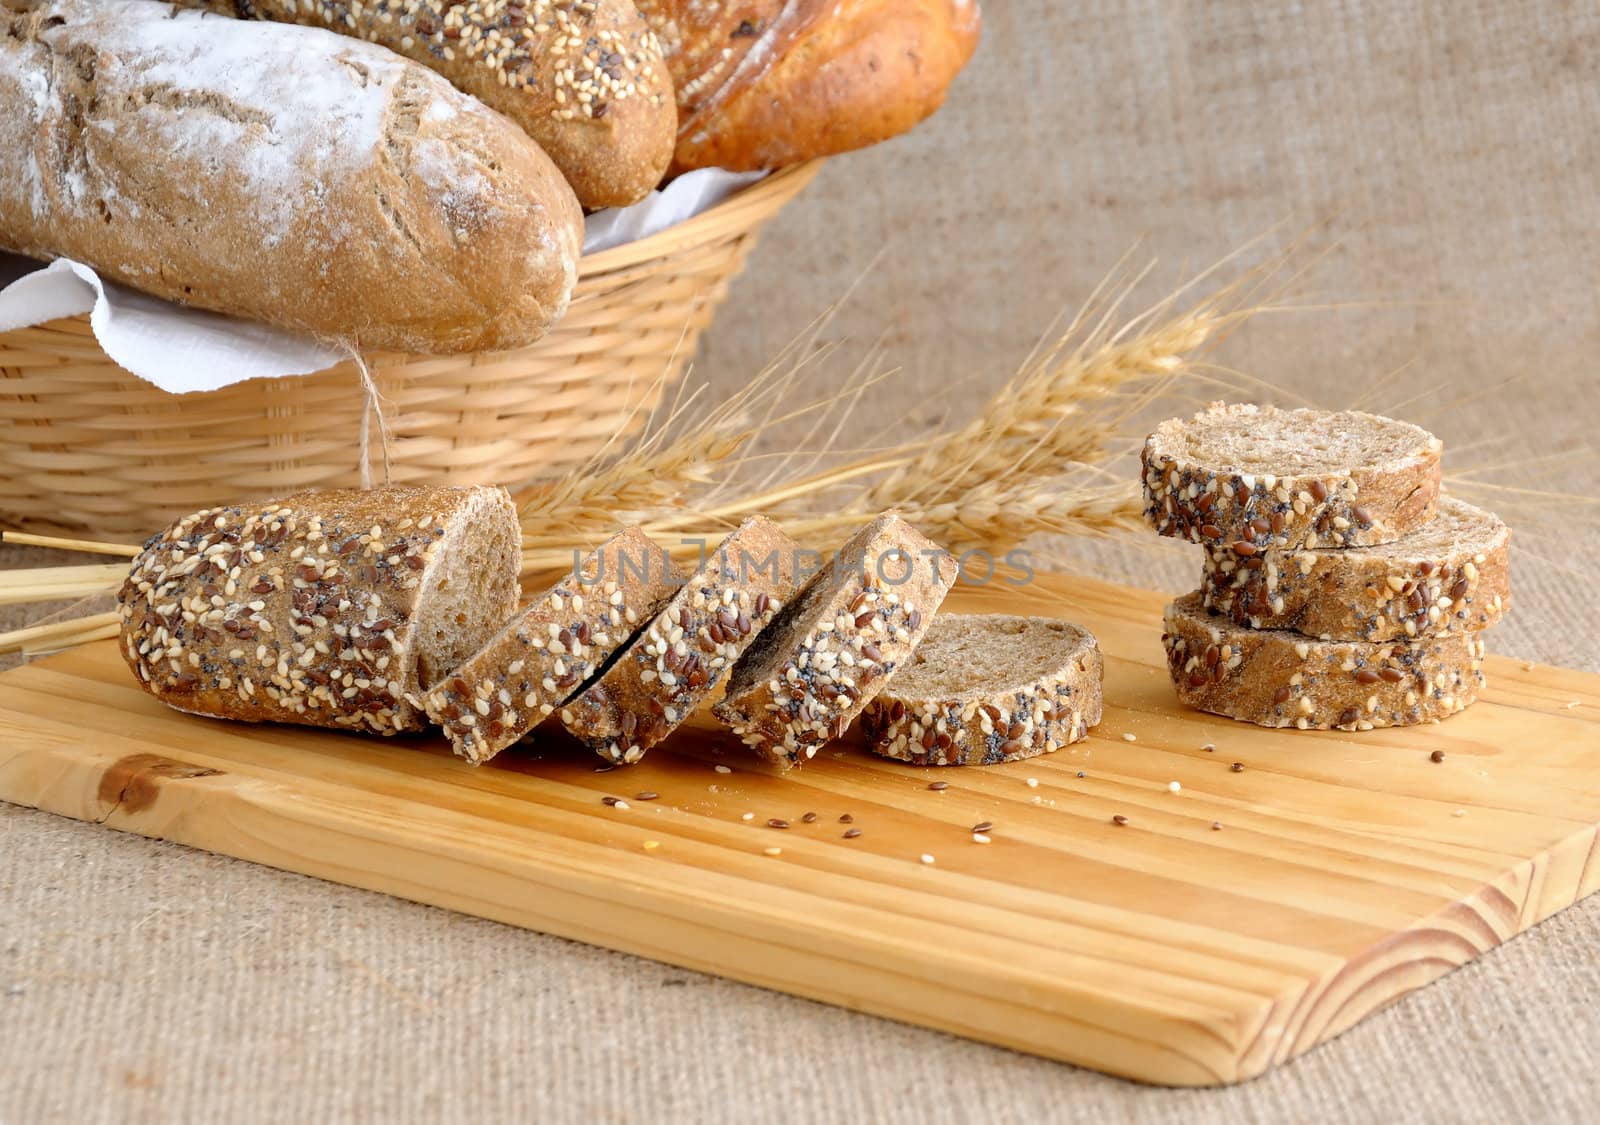 Diverse bread with slices of bread with grains on a wooden board with ears of wheat